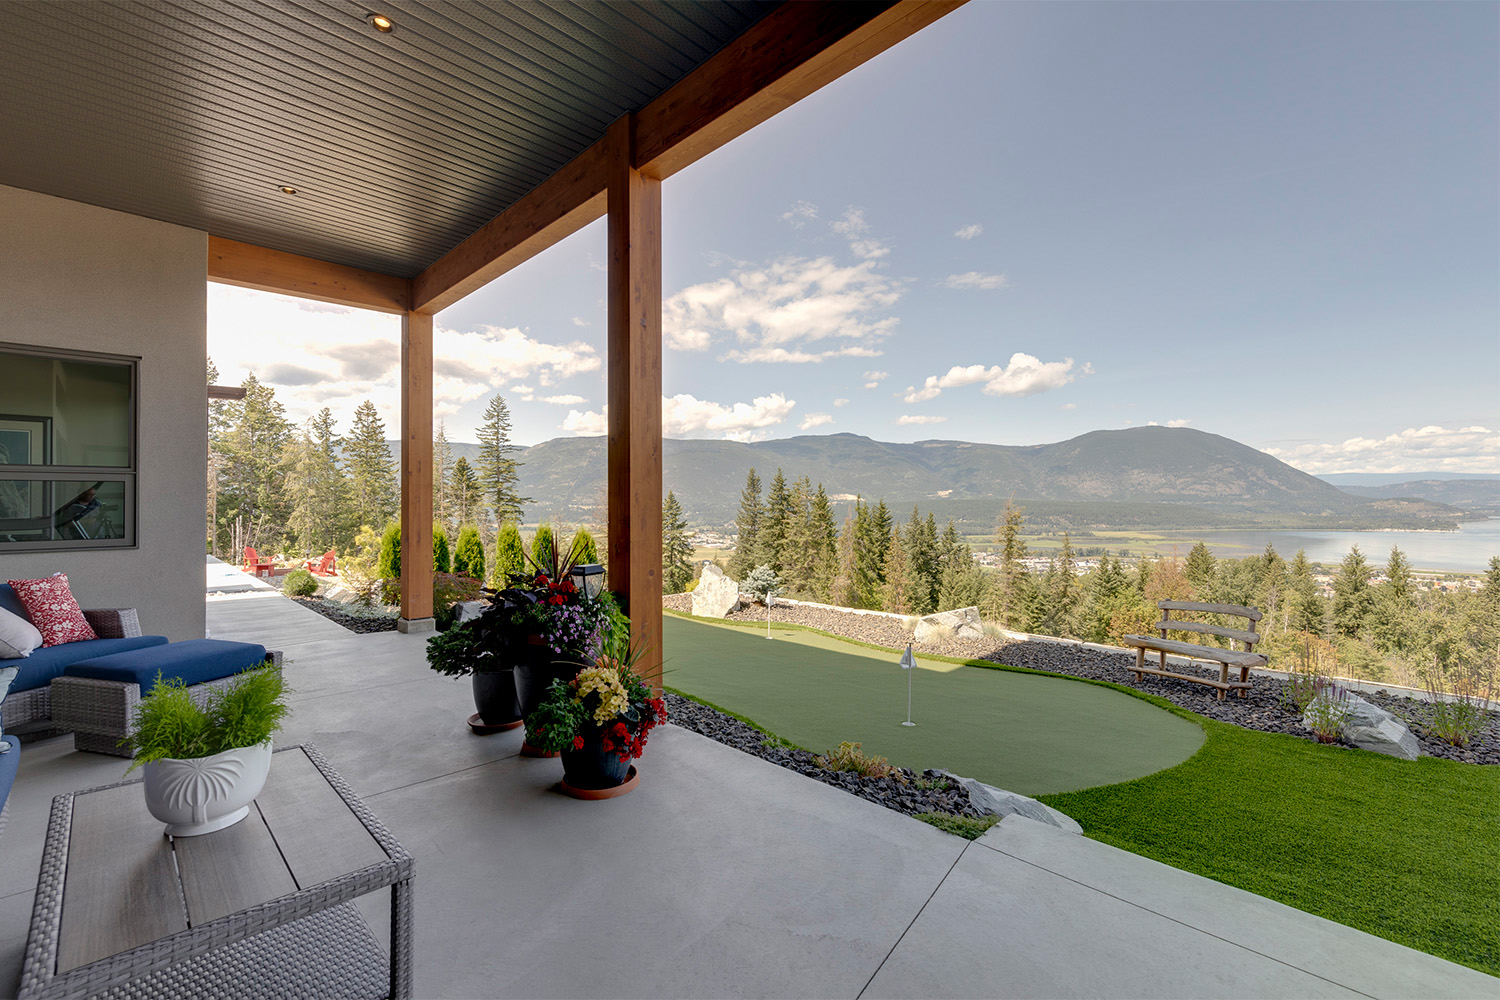 patio and backyard with small putting green, beautiful view overlooking shuswap lake